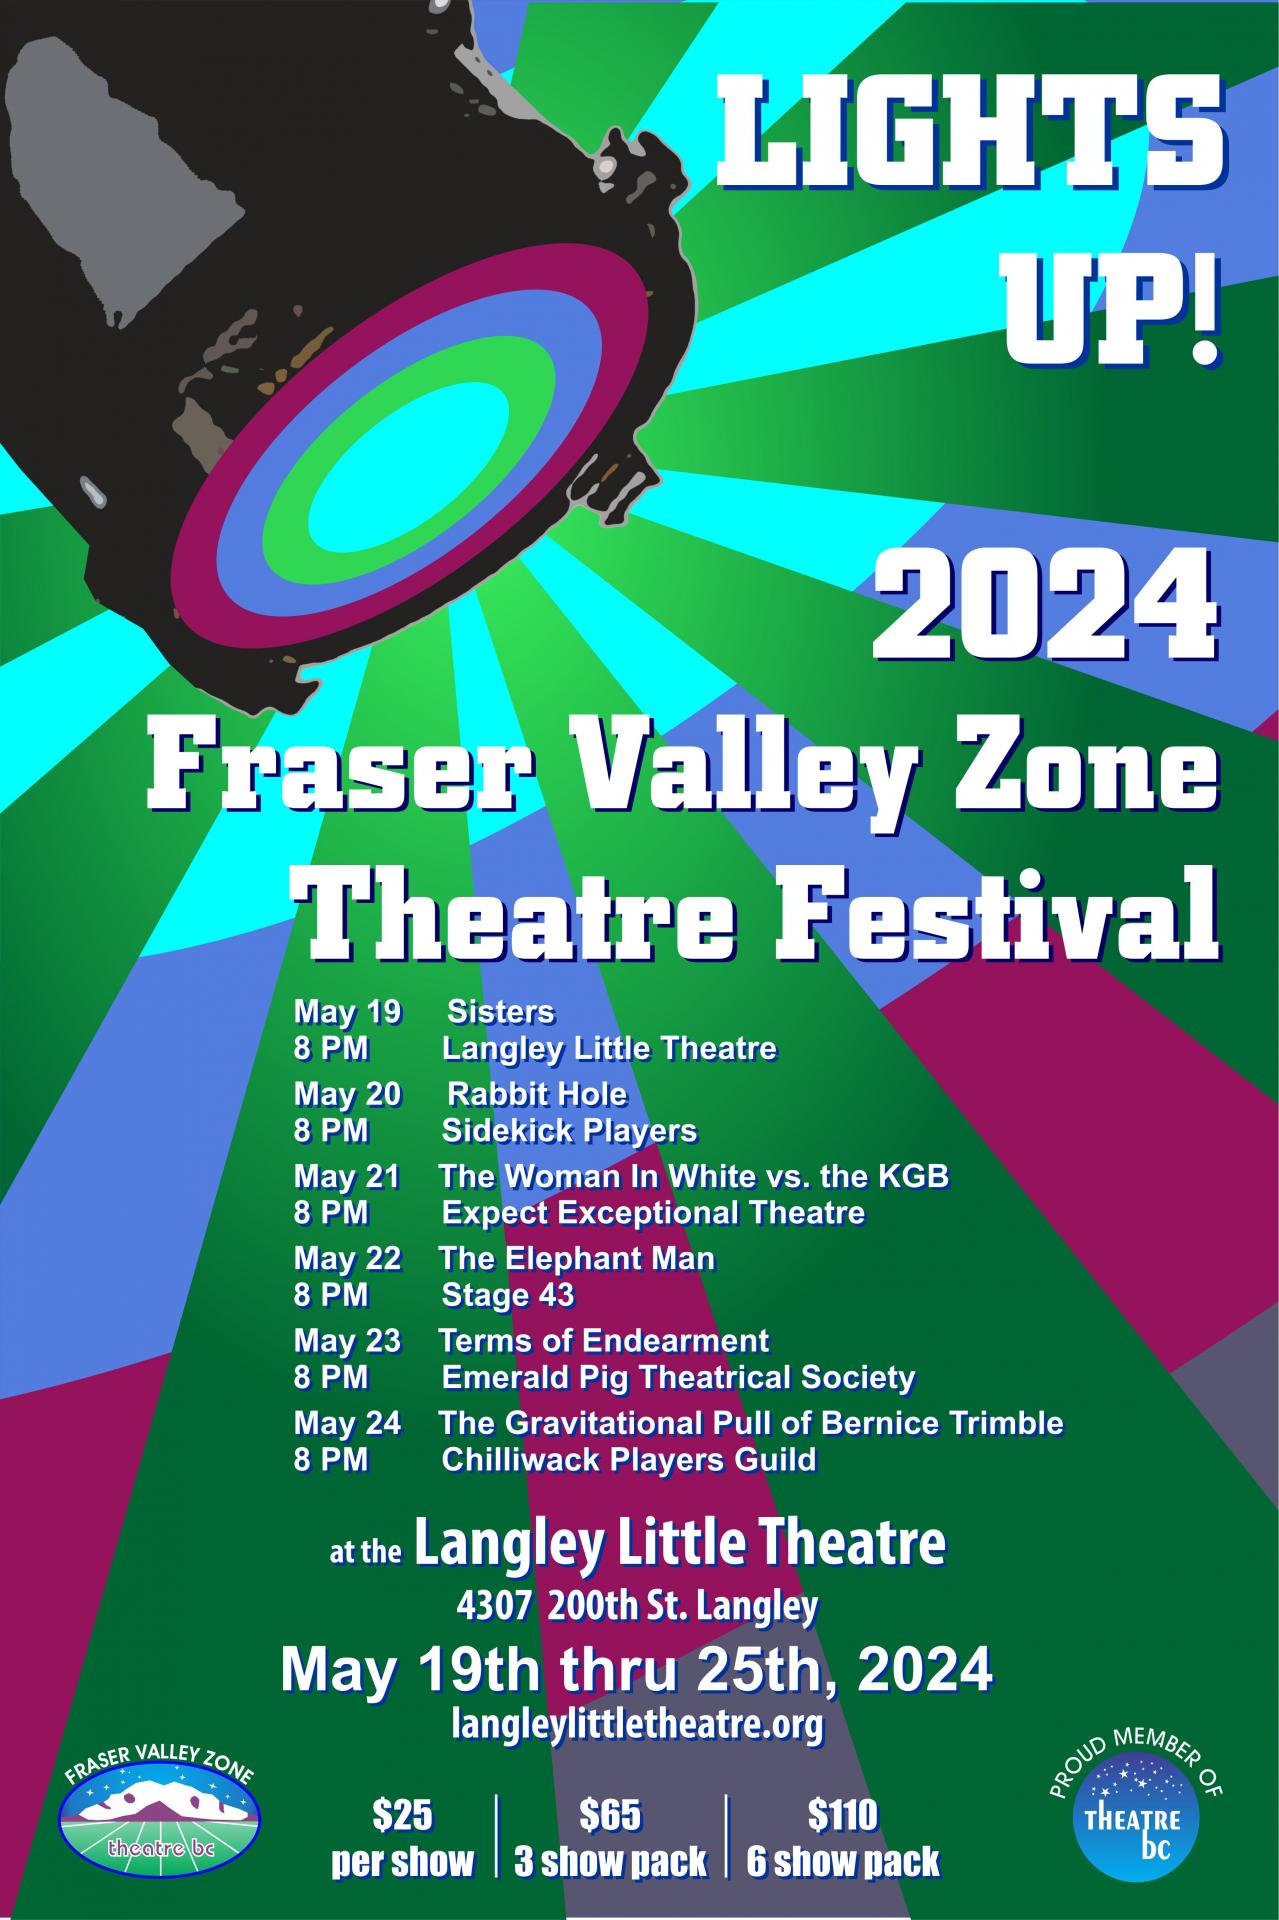 FVZ Festival - Sisters - presented by Langley Little Theatre